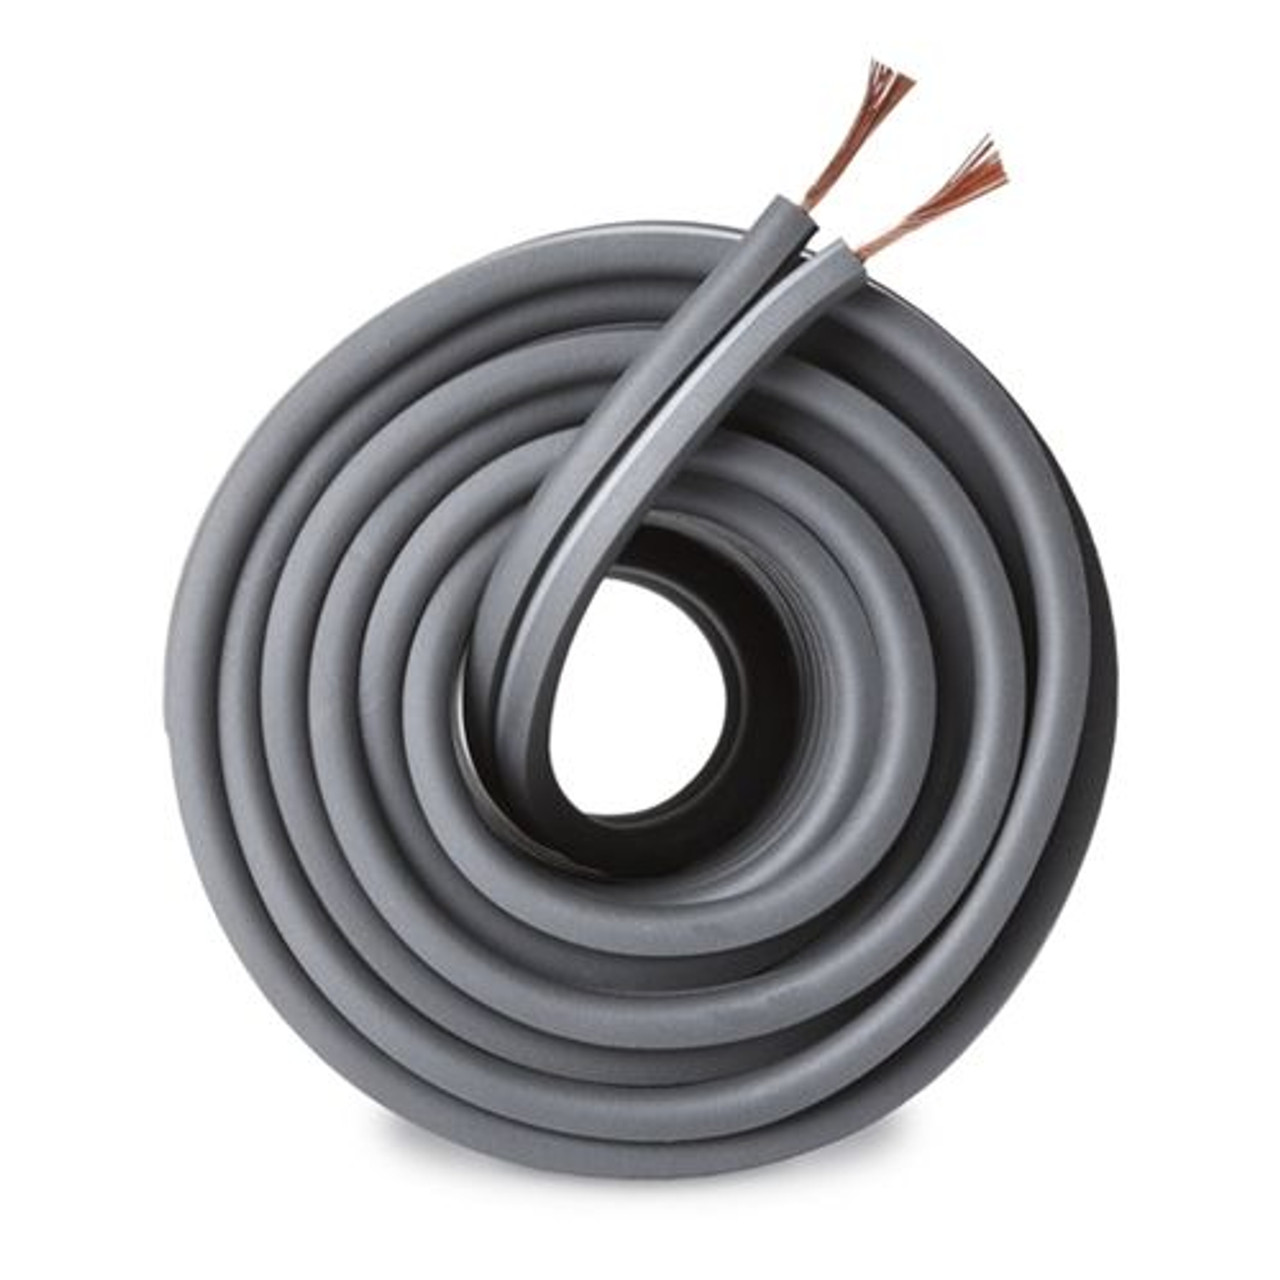 Eagle 100' FT Speaker Cable 16 AWG GA 2 Conductor Standard Stranded Copper Gray S16 Oxygen Free Flexible